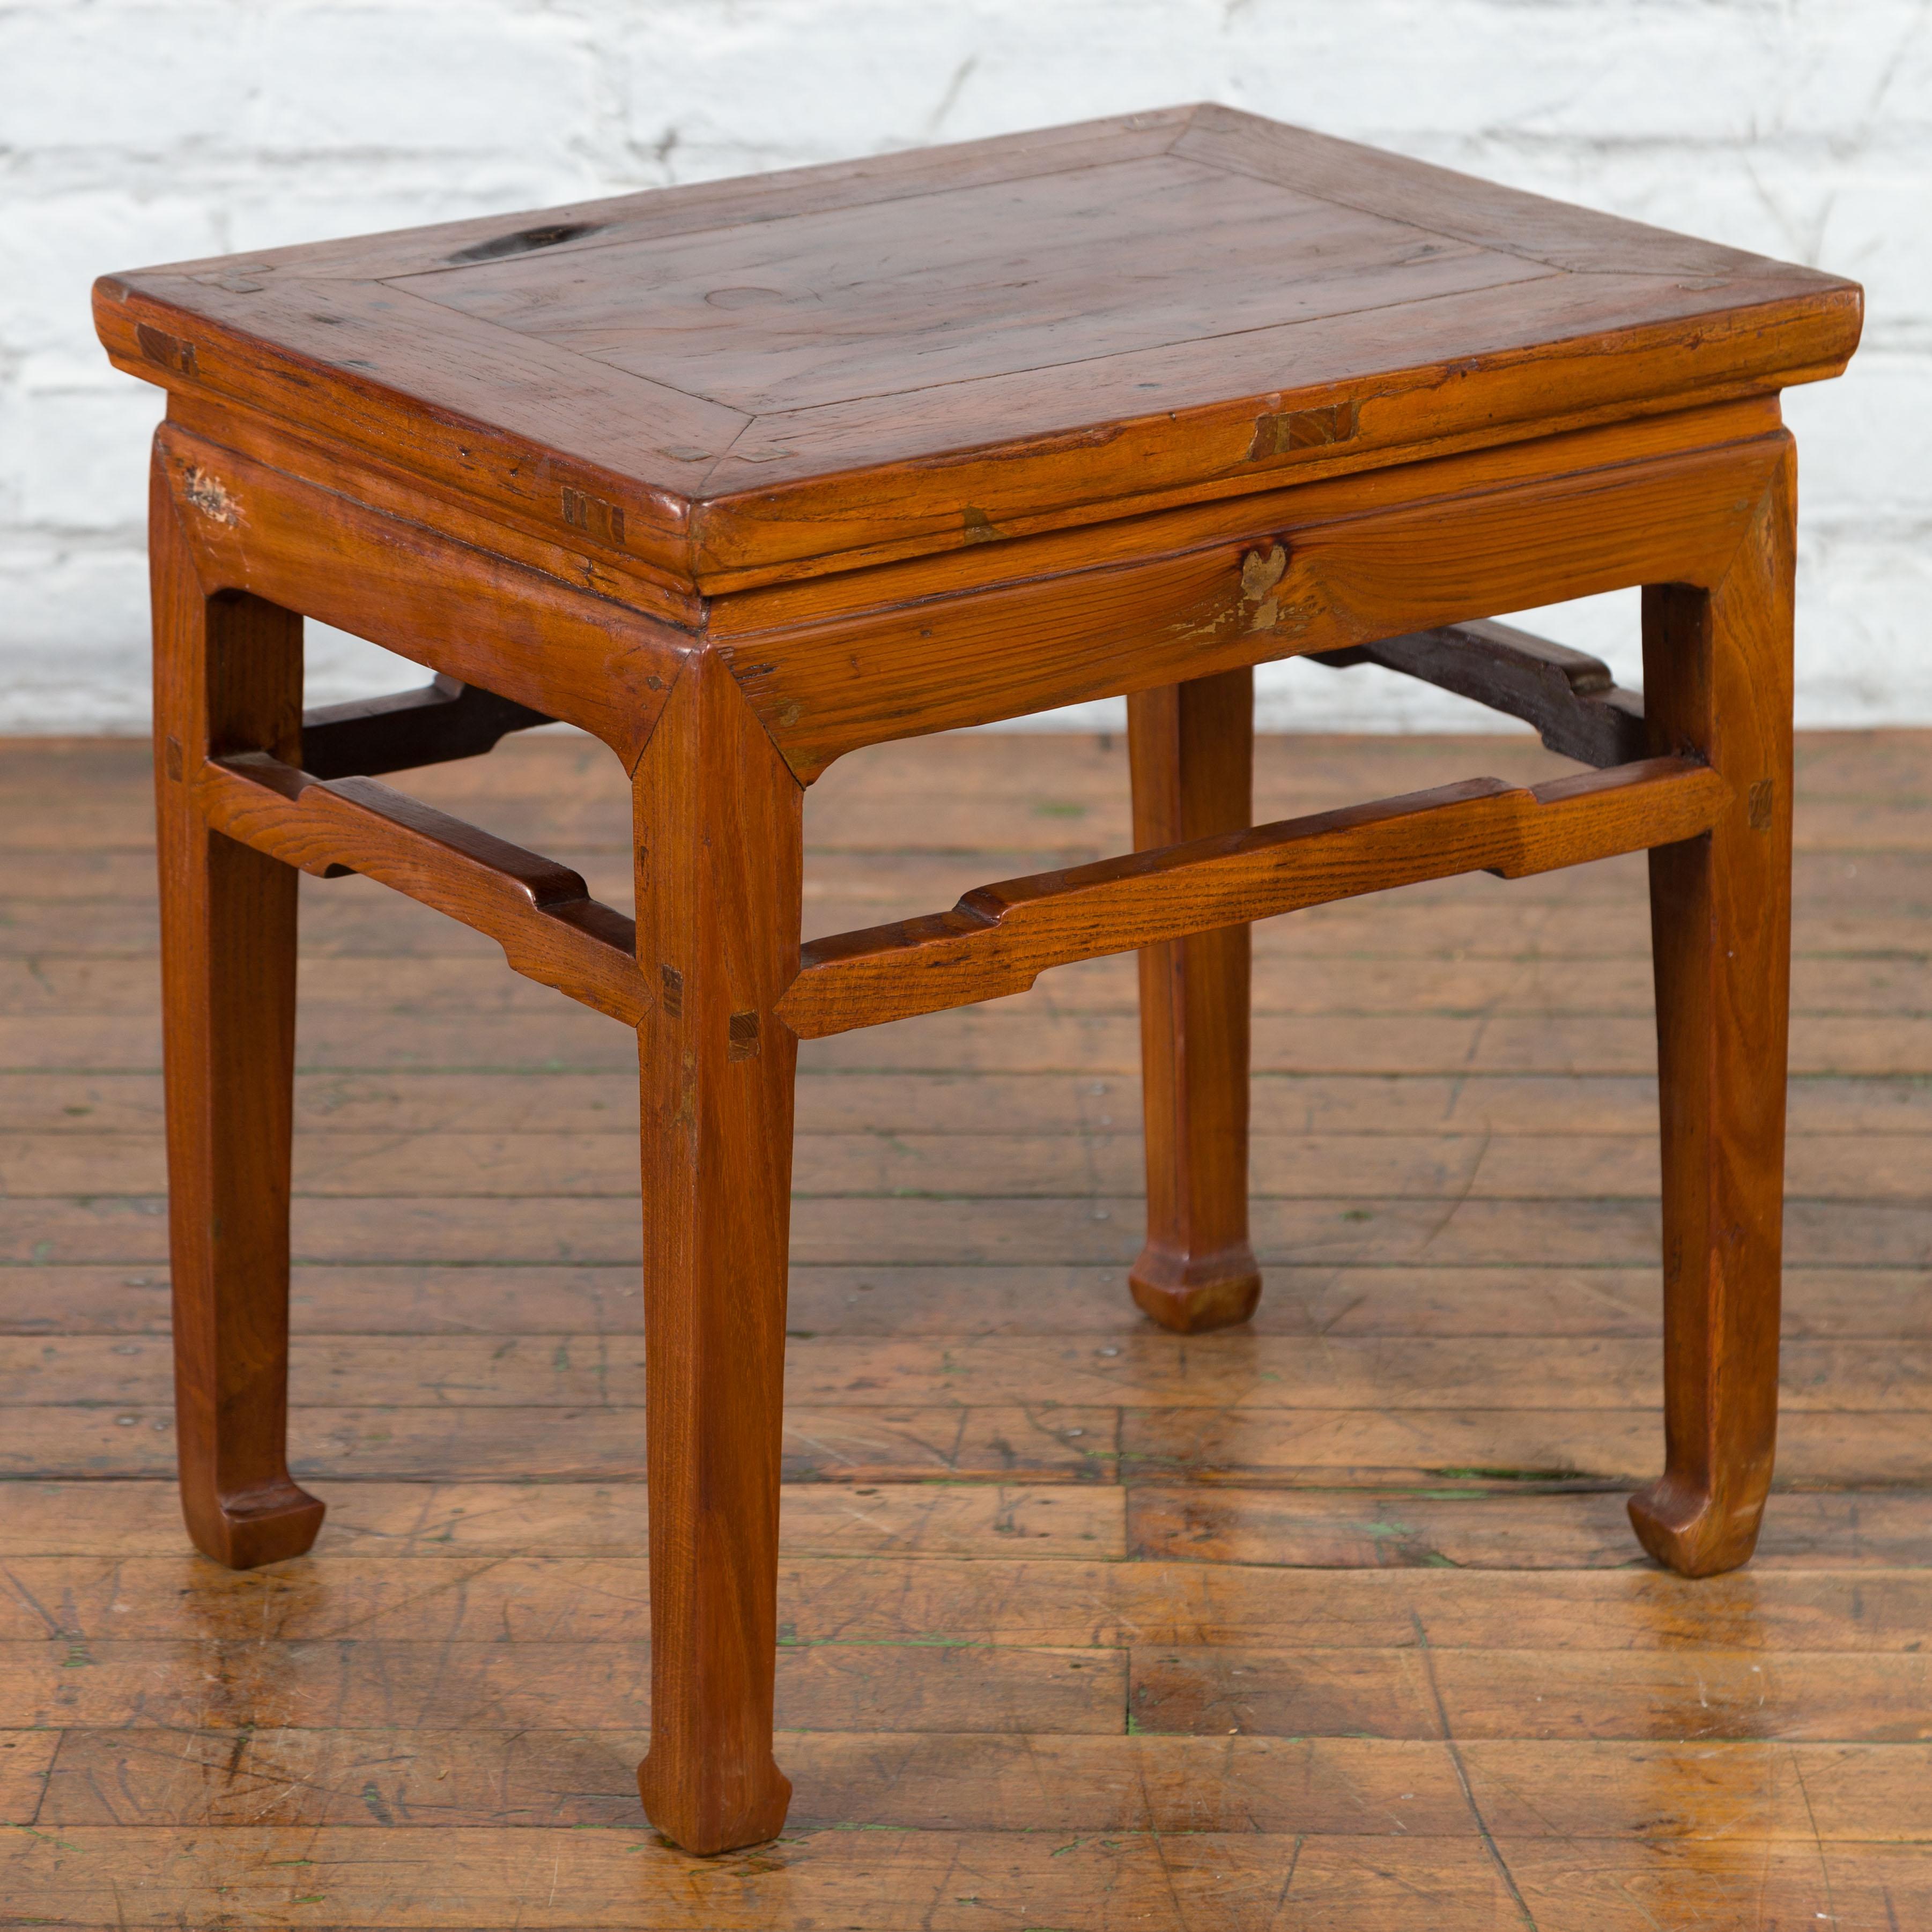 A Chinese Qing Dynasty period side table from the 19th century with waisted apron, humpback stretcher, horse hoof feet and natural patina. Created in China during the Qing Dynasty period in the 19th century, this side table features a rectangular